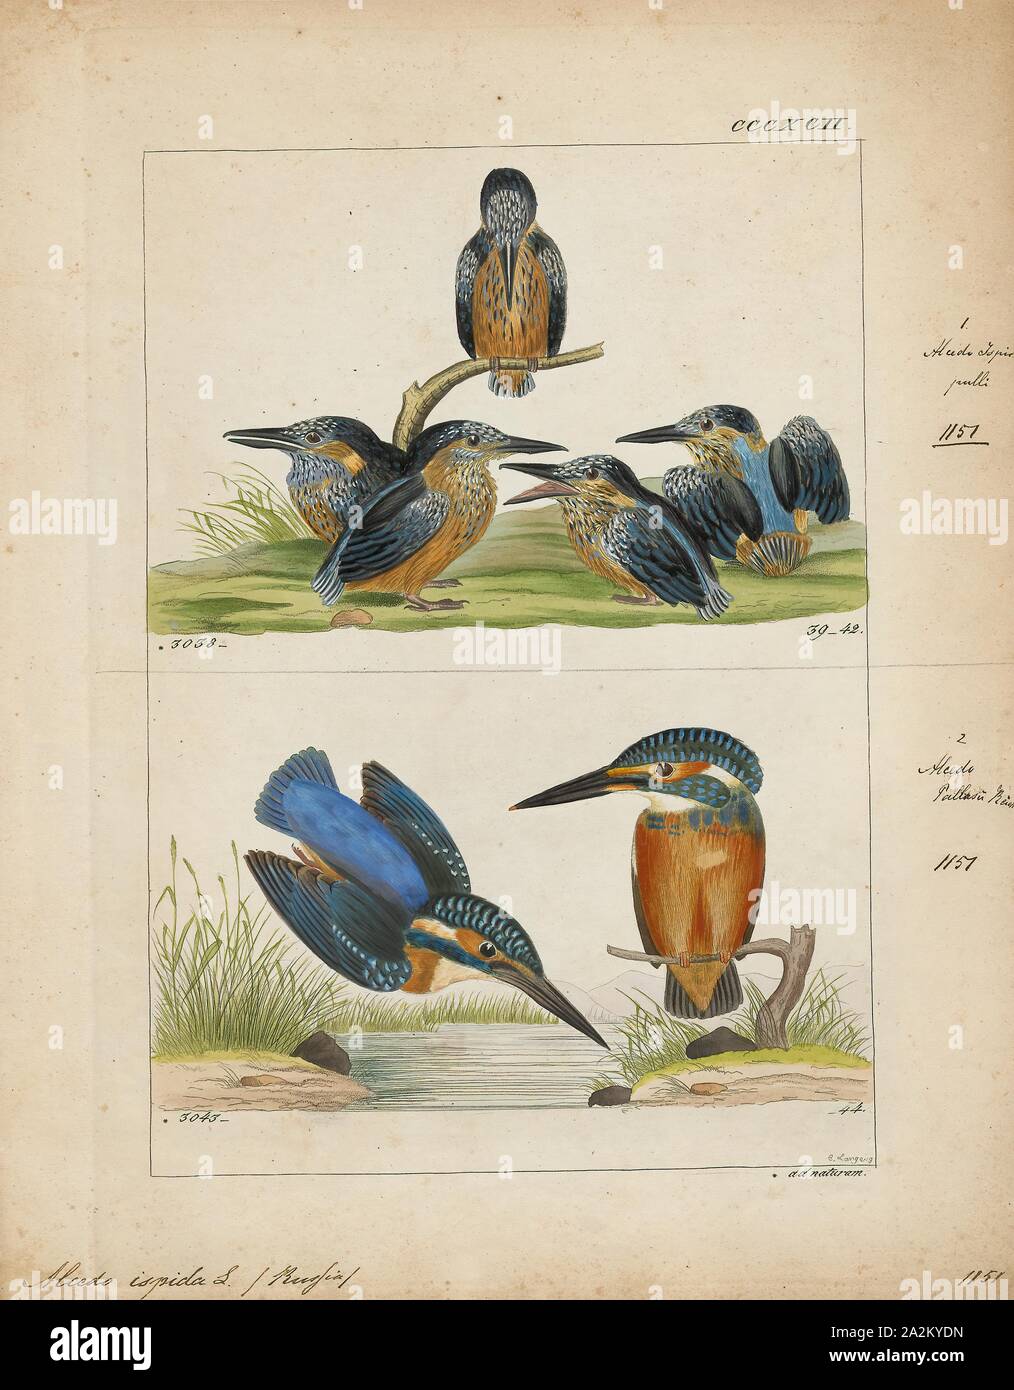 Alcedo ispida, Print, The common kingfisher (Alcedo atthis) also known as the Eurasian kingfisher, and river kingfisher, is a small kingfisher with seven subspecies recognized within its wide distribution across Eurasia and North Africa. It is resident in much of its range, but migrates from areas where rivers freeze in winter., 1820-1863 Stock Photo